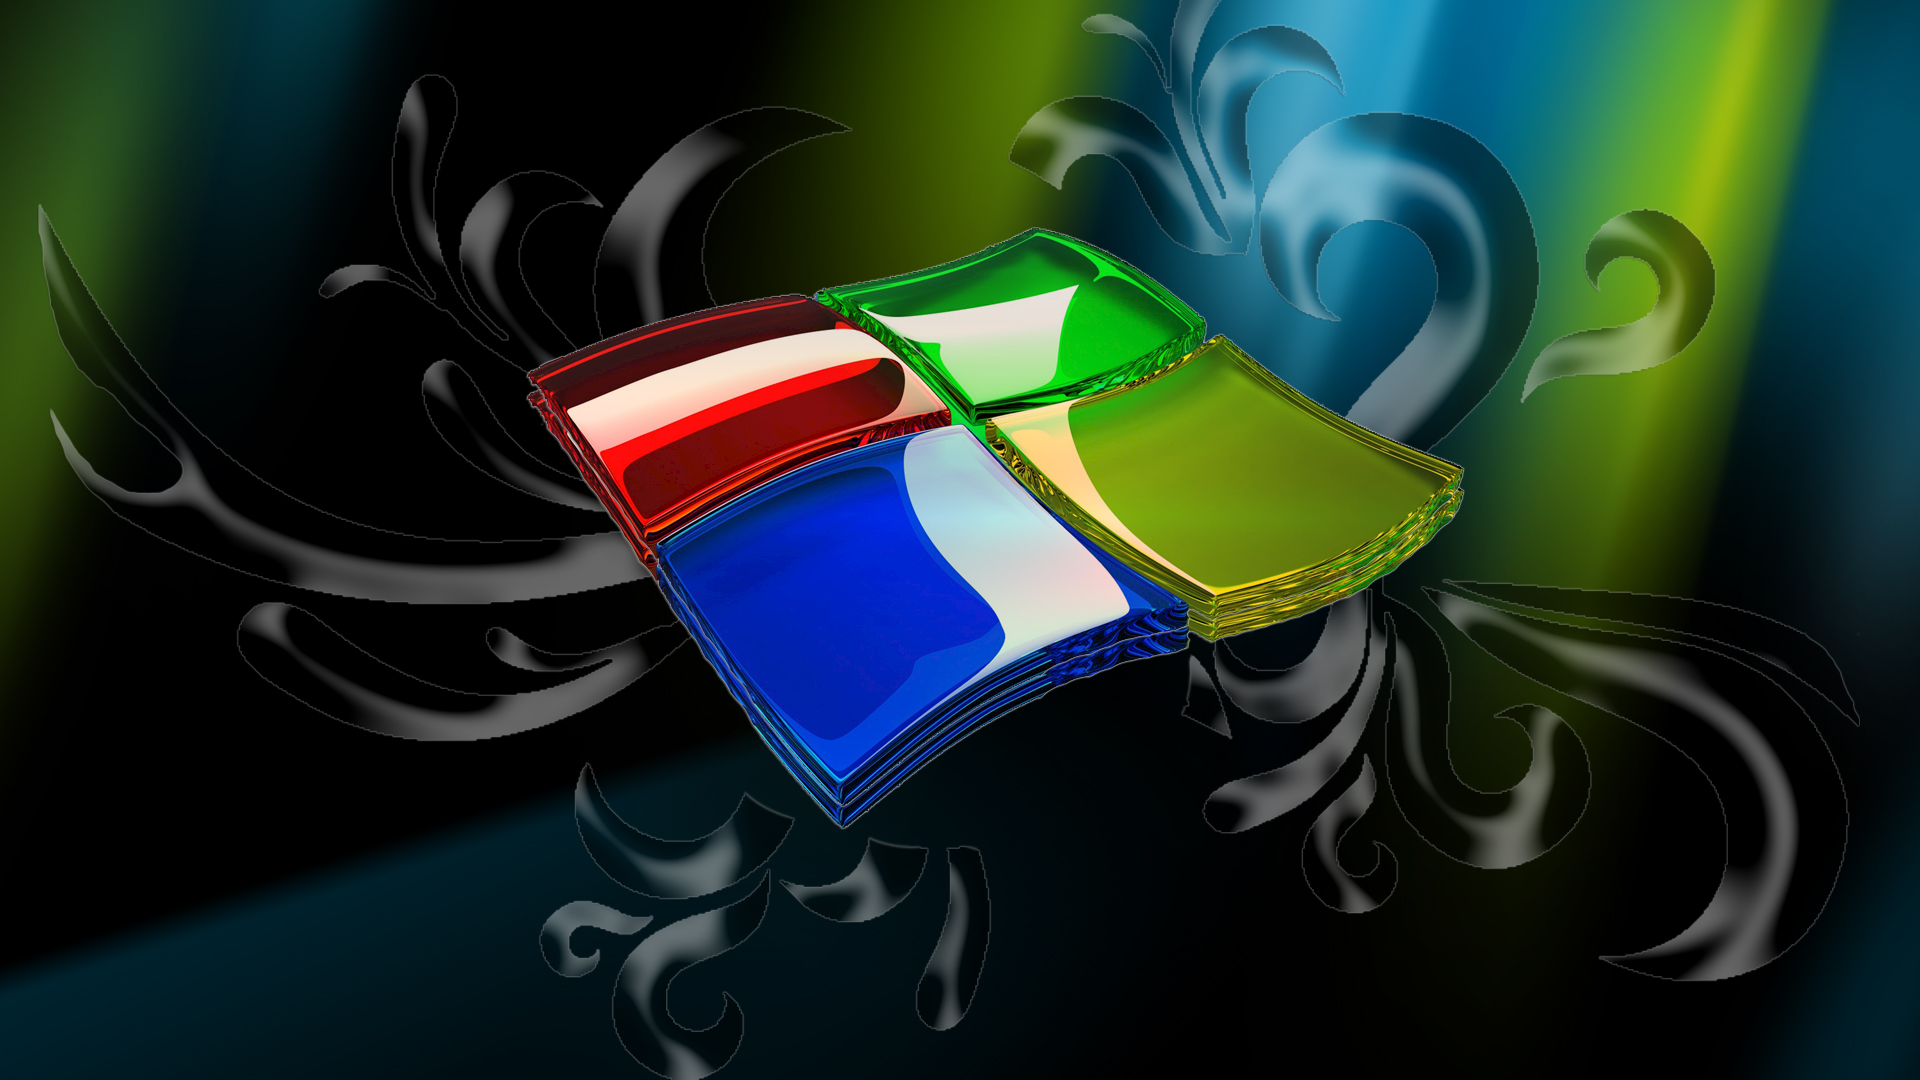 20+ Windows 7 Wallpapers 3d | New Wallpapers Free
